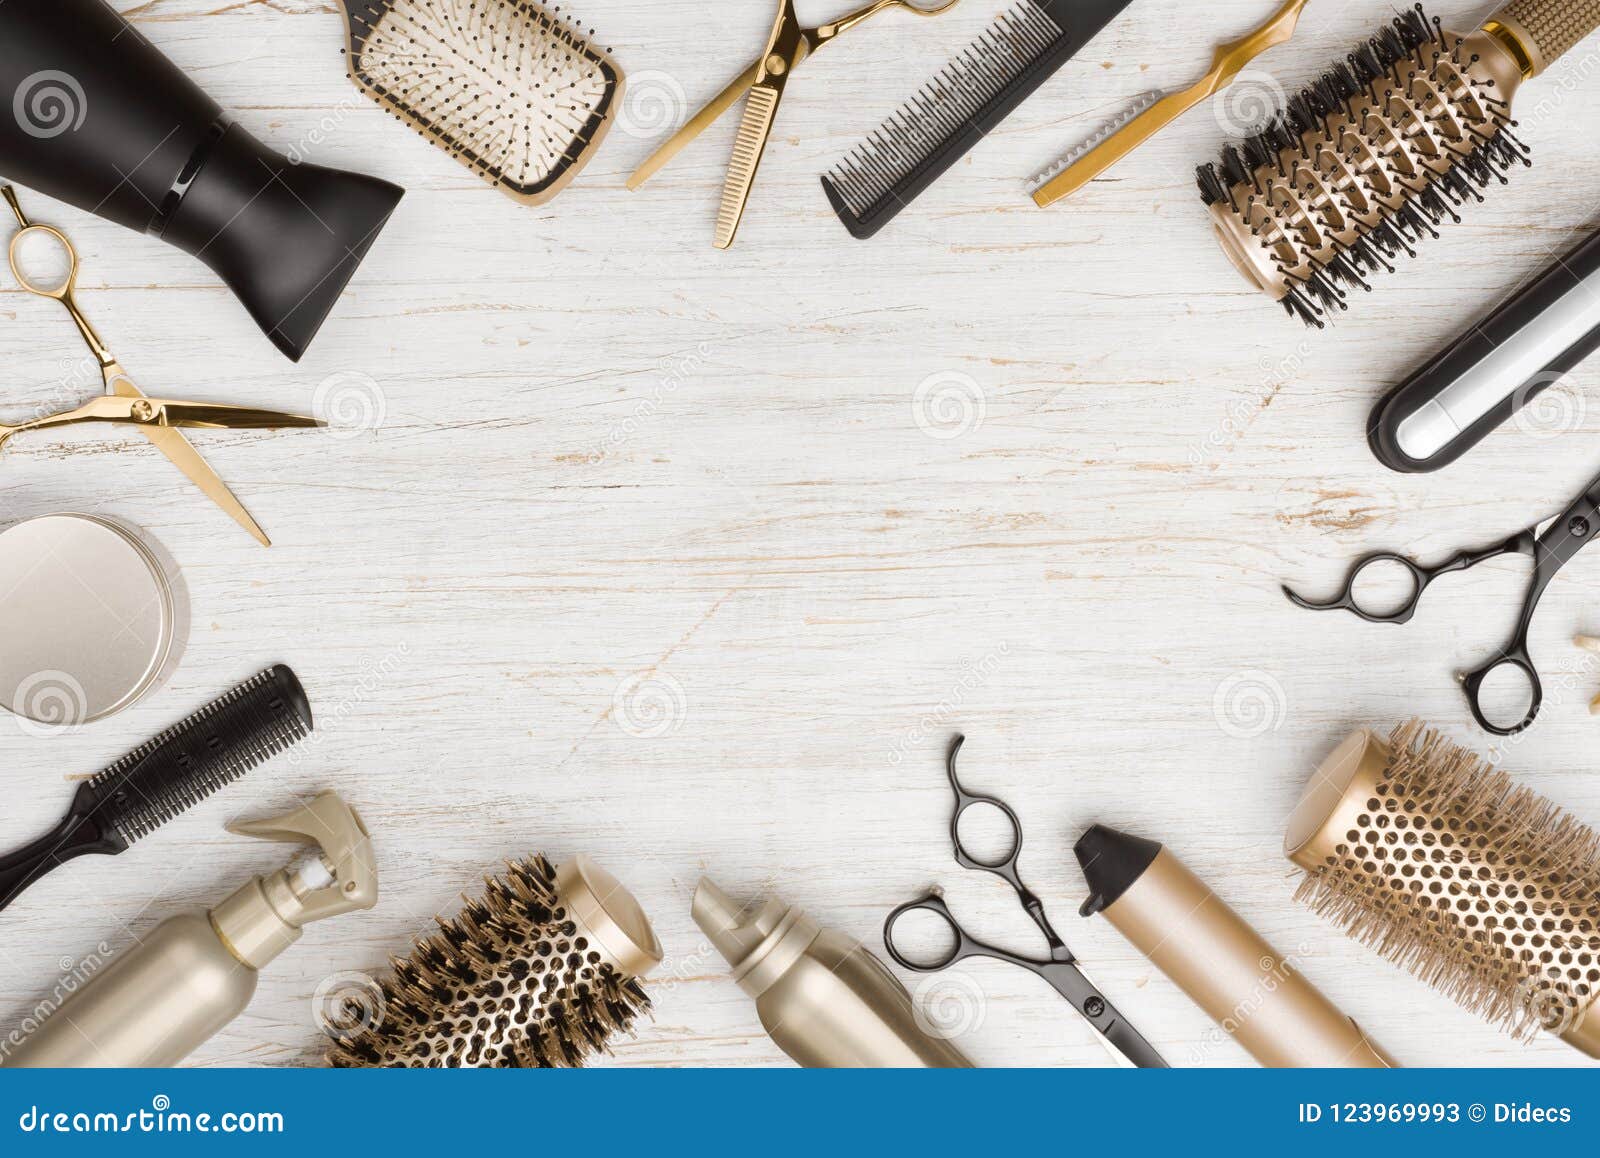 various hair dresser tools on wooden background with copy space